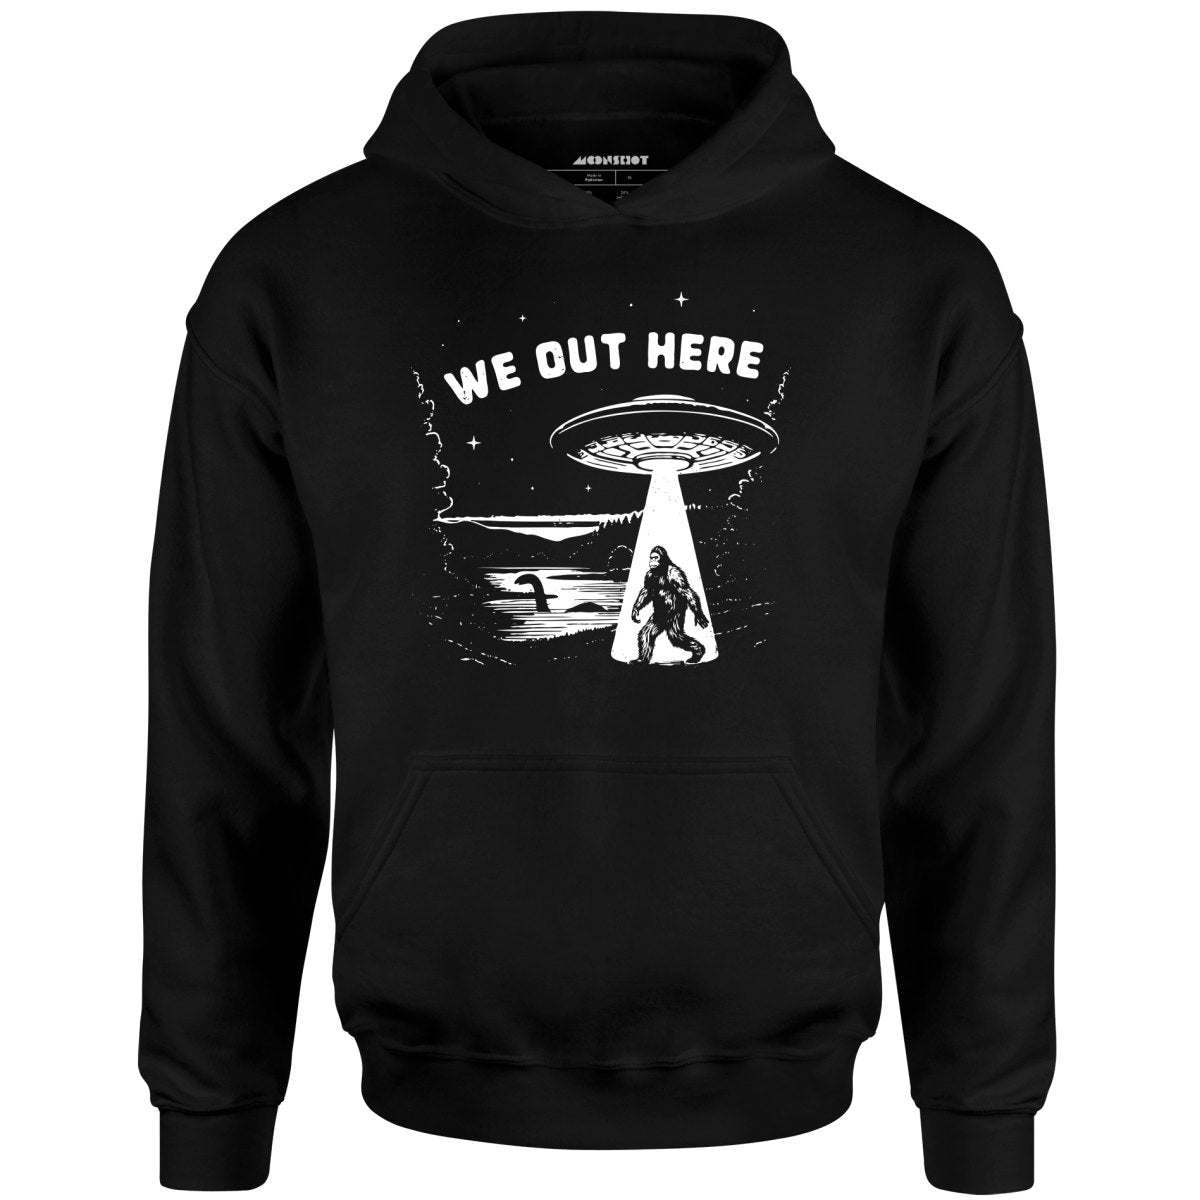 We Out Here - Unisex Hoodie